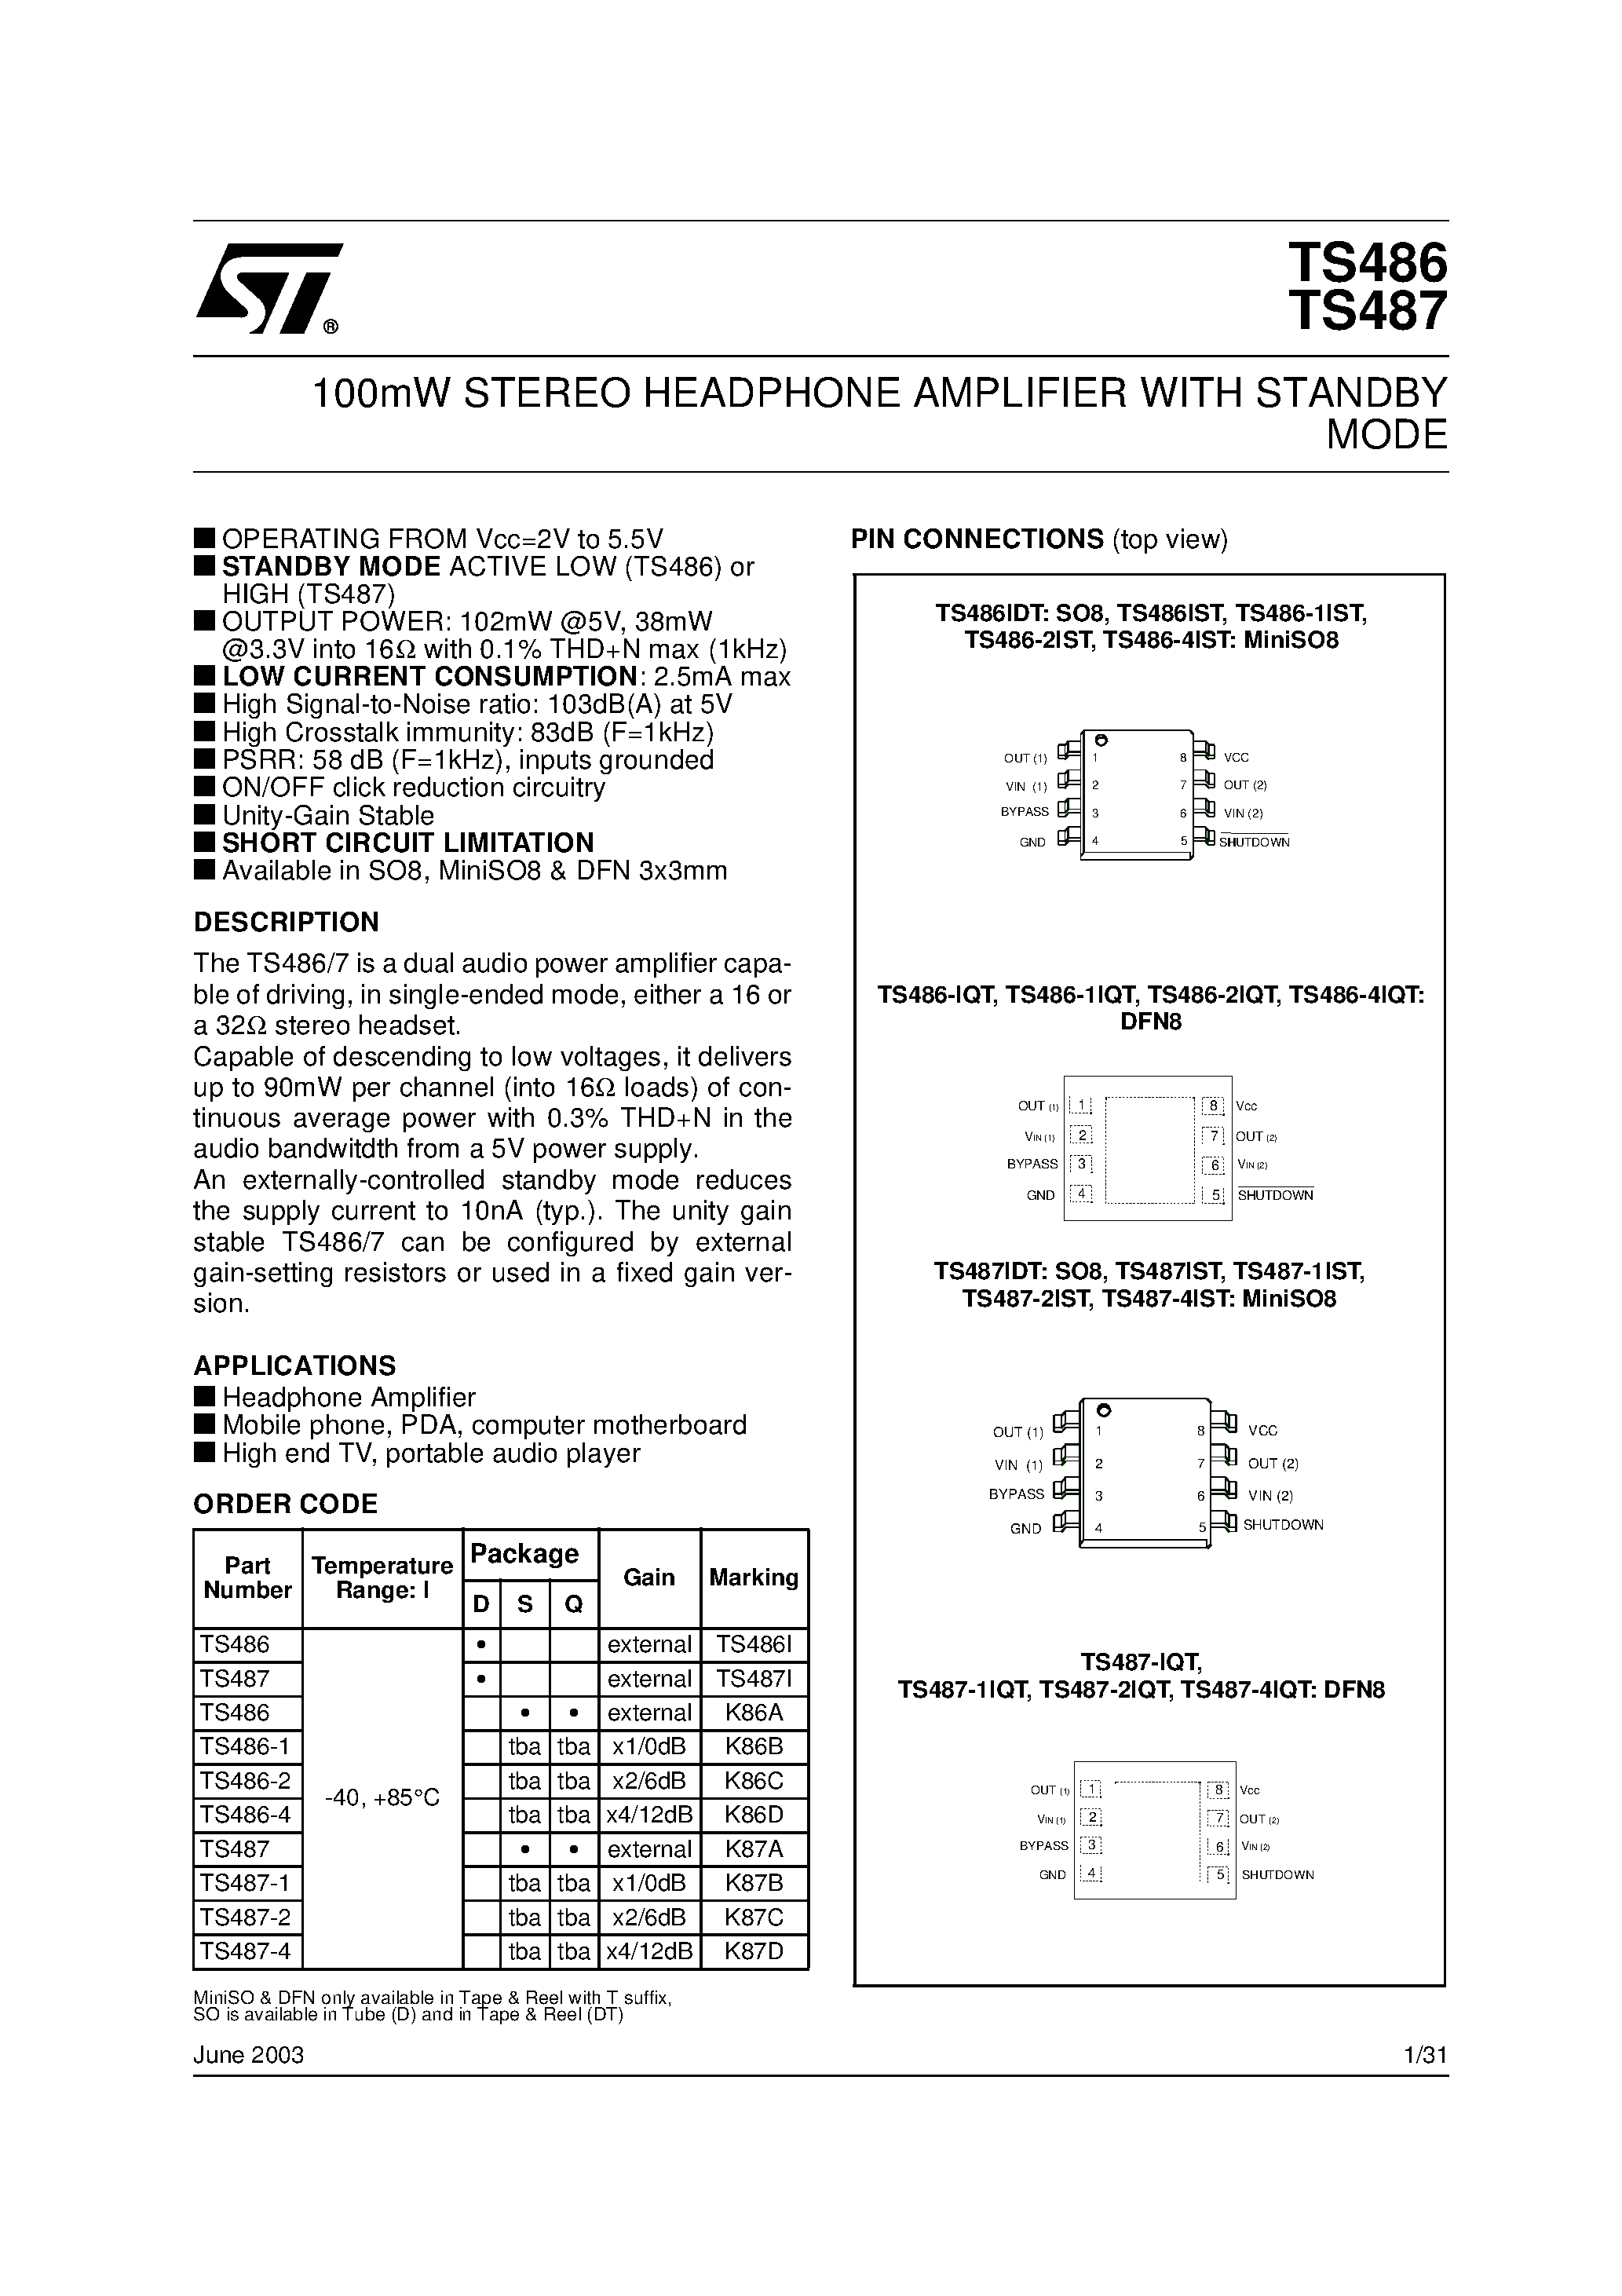 Datasheet TS486-4 - 100mW STEREO HEADPHONE AMPLIFIER WITH STANDBY MODE page 1